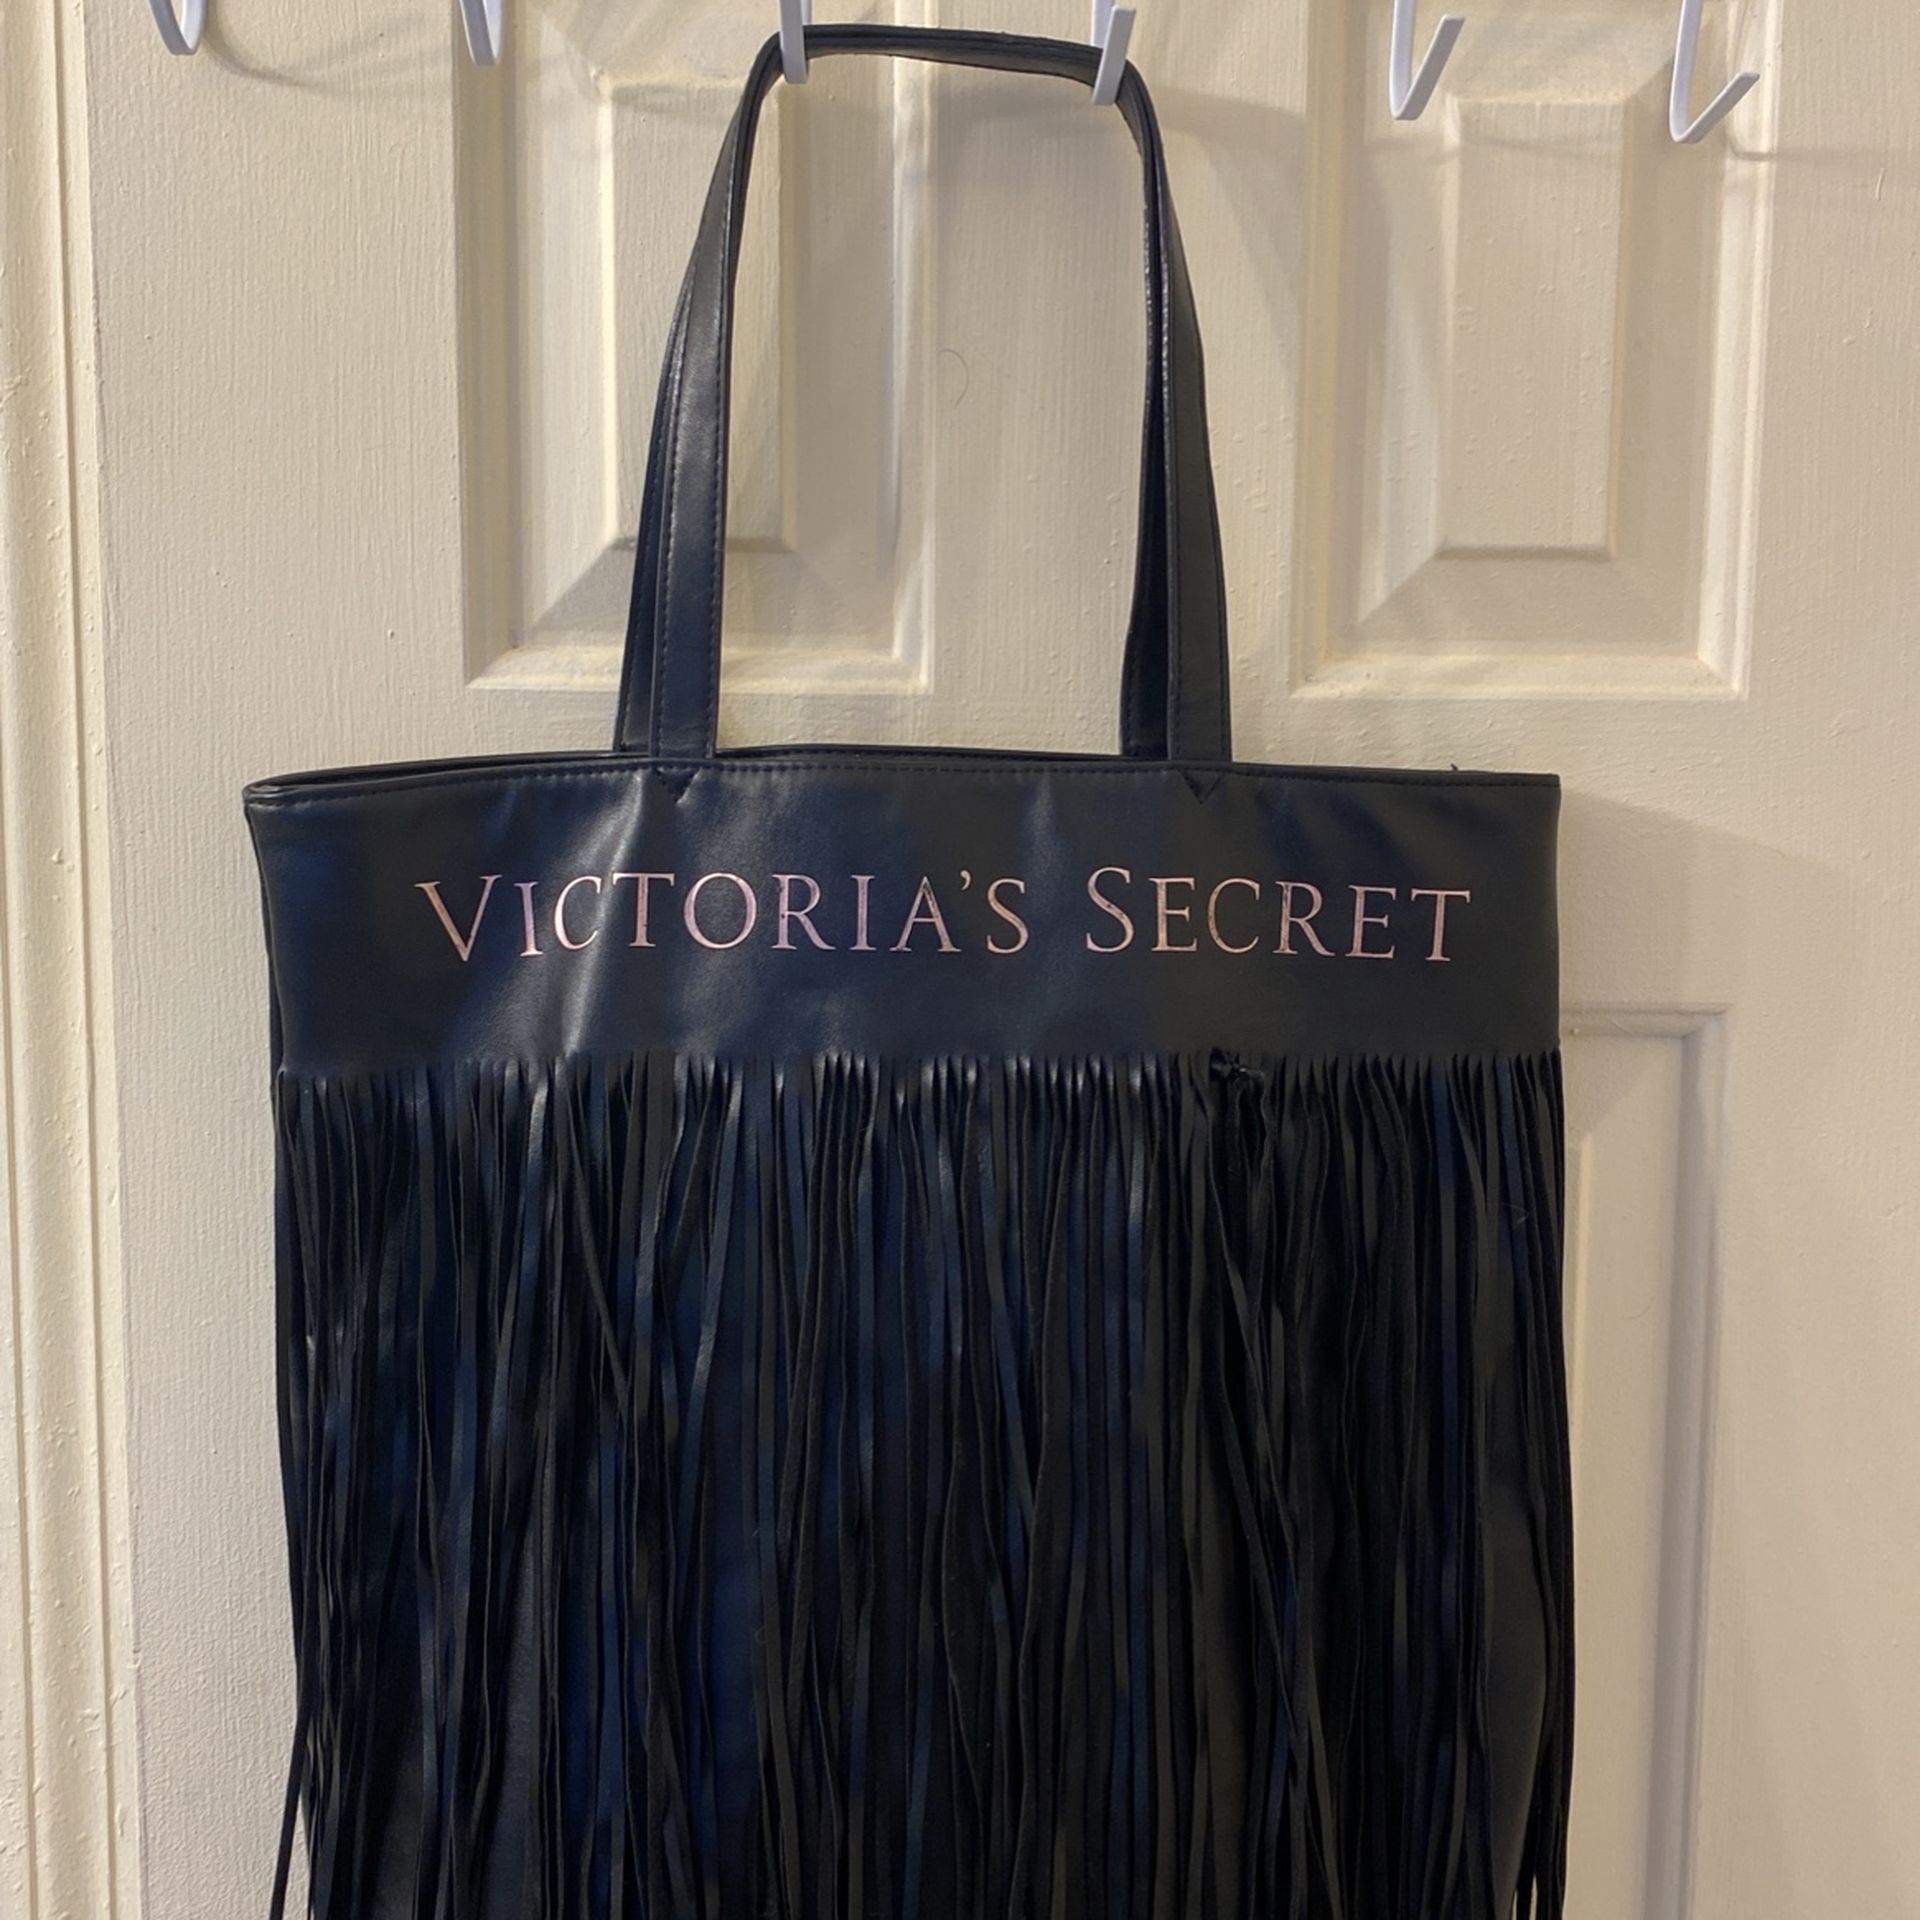 Victoria Secret Gently Used Like New Large Tote With 1 Inside Pocket Excellent Condition $7 Firm C My Other Bags Ty